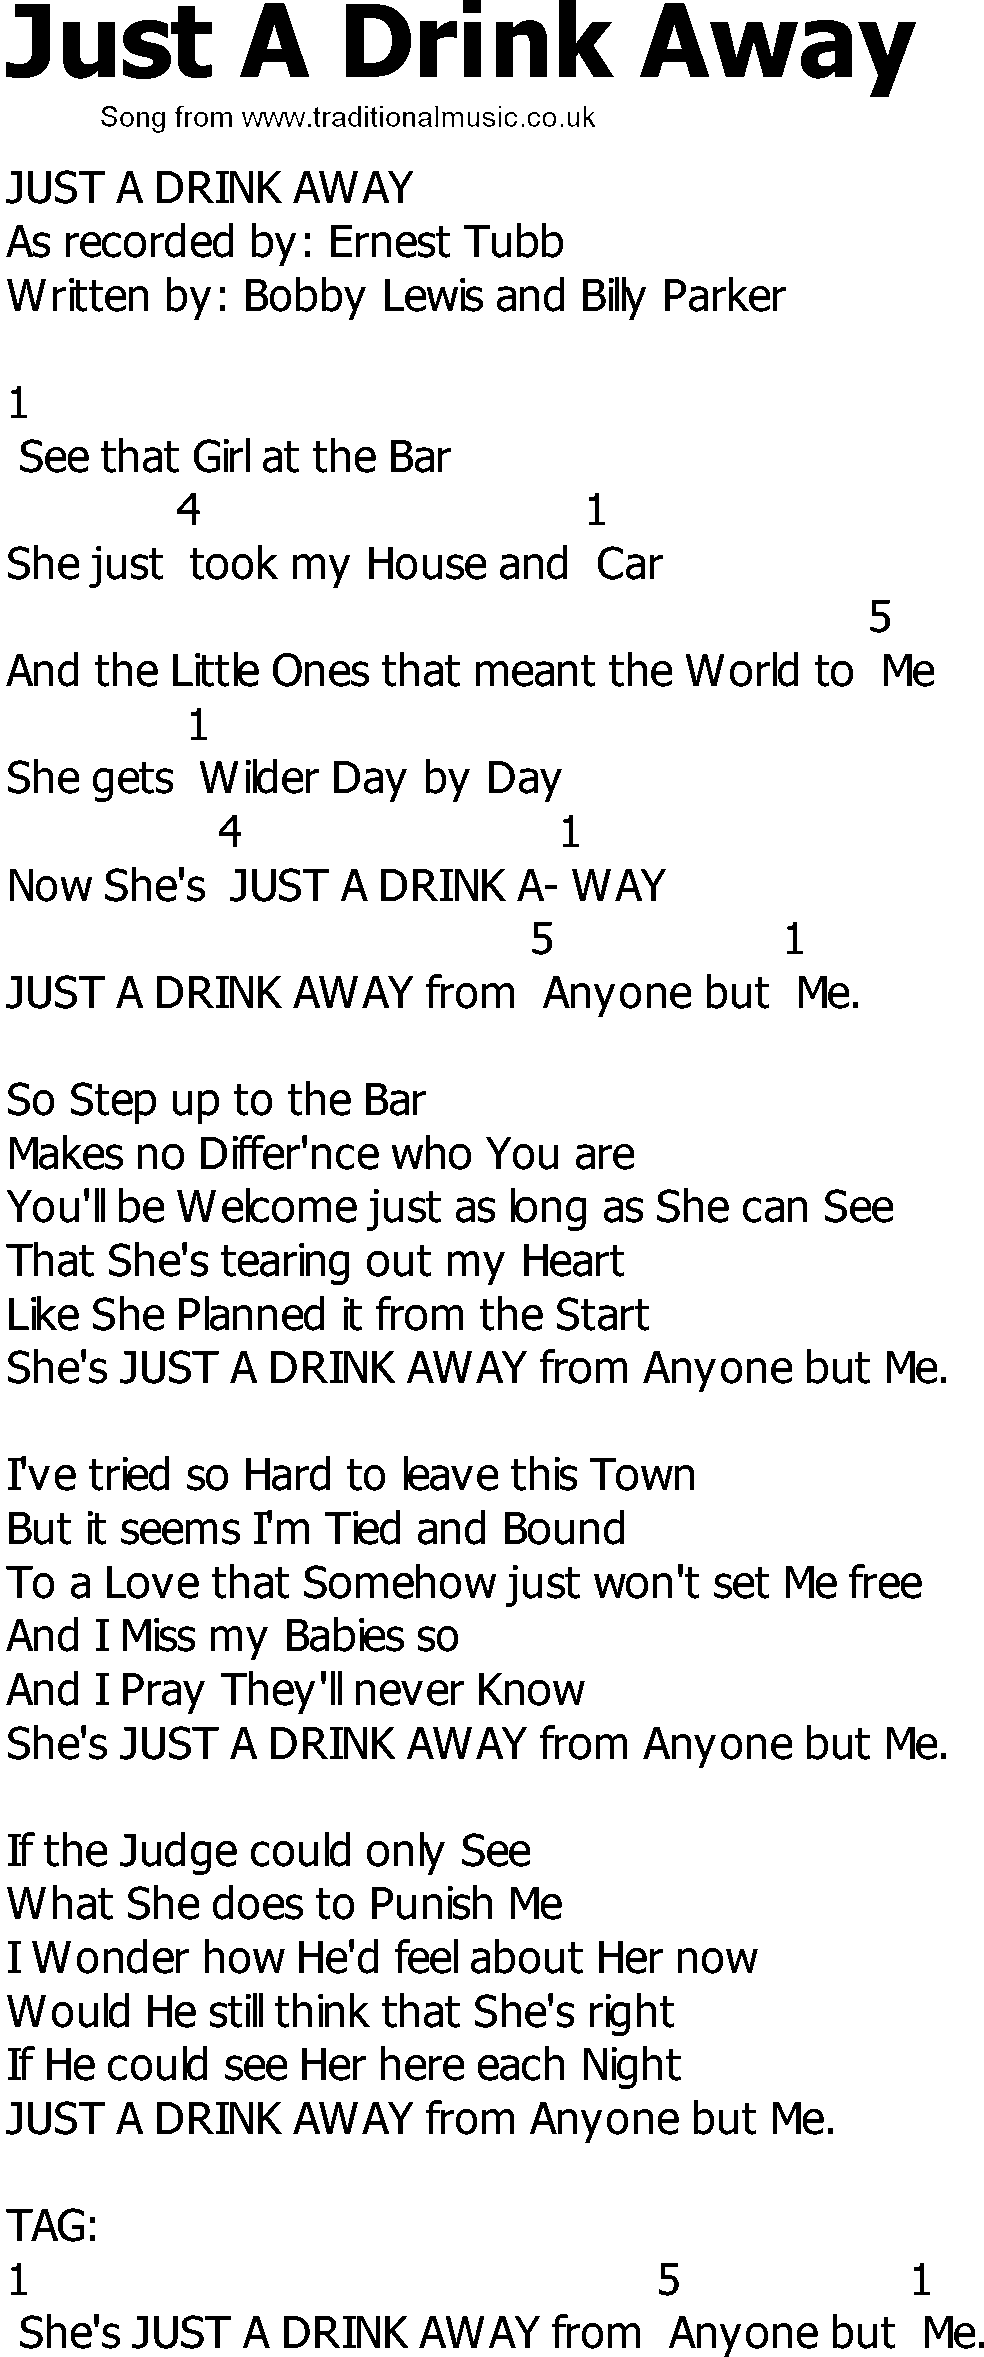 Old Country song lyrics with chords - Just A Drink Away